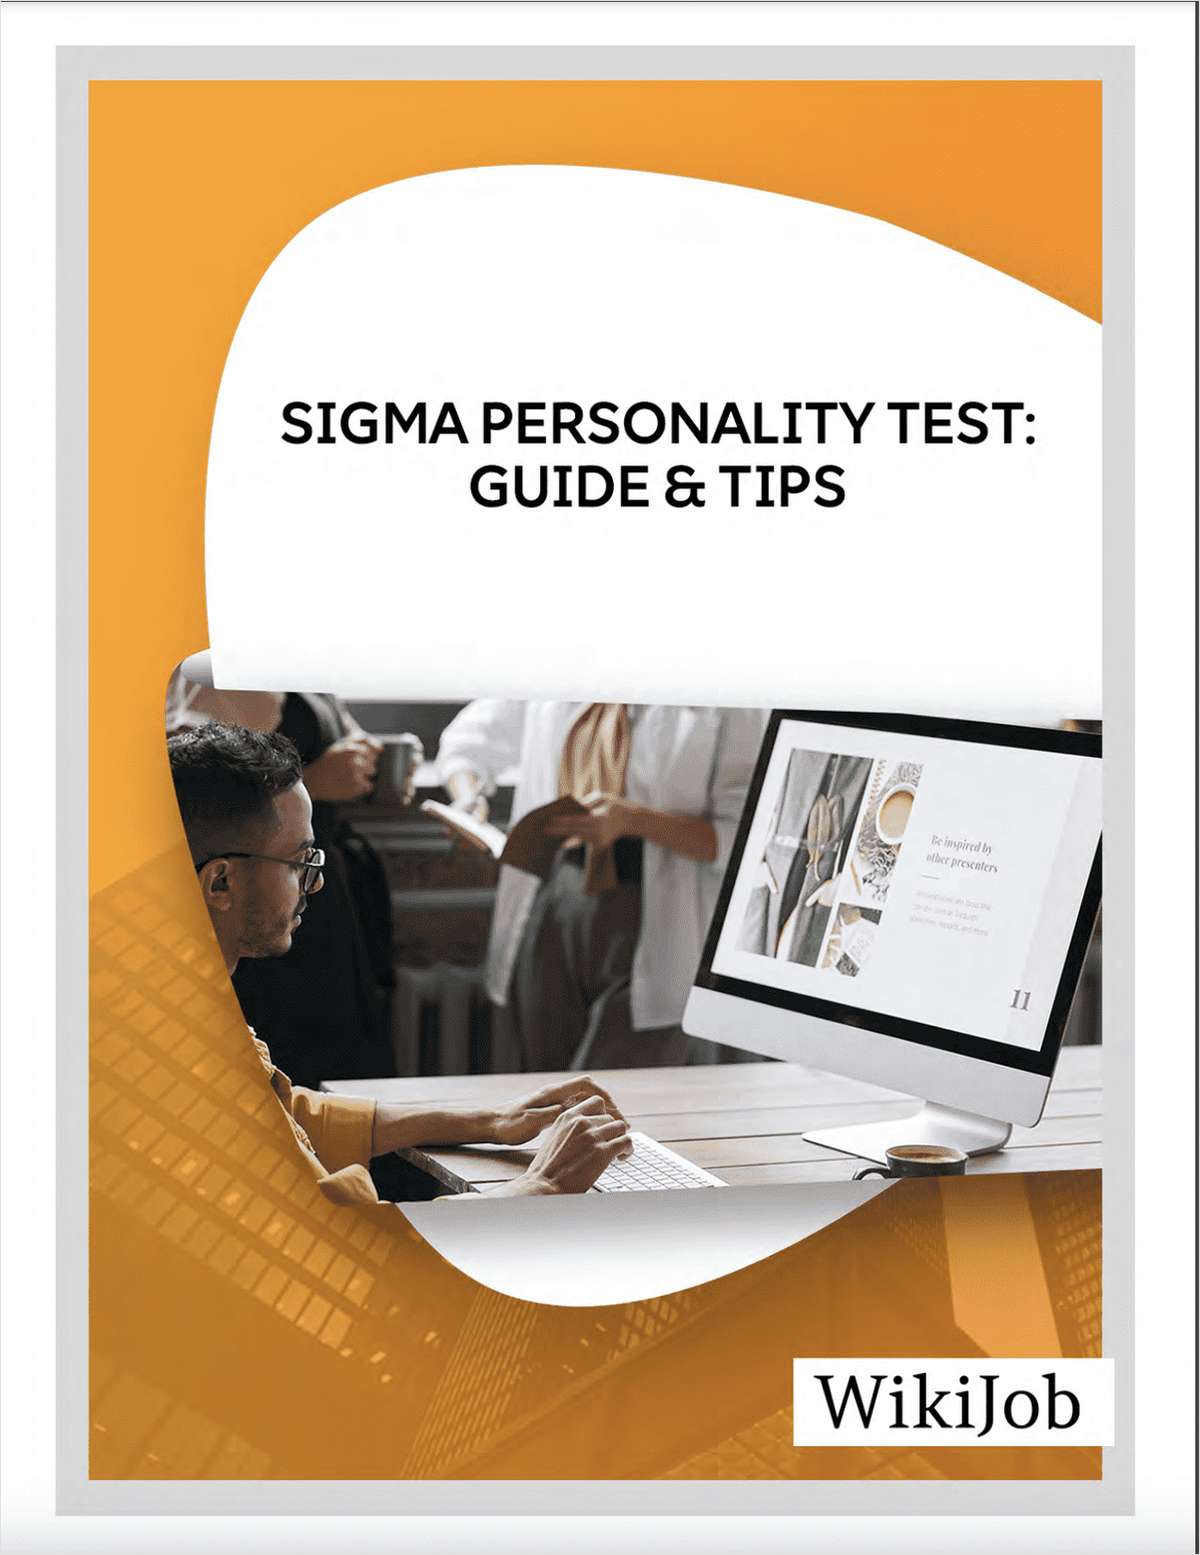 Sigma Personality Test: Guide & Tips